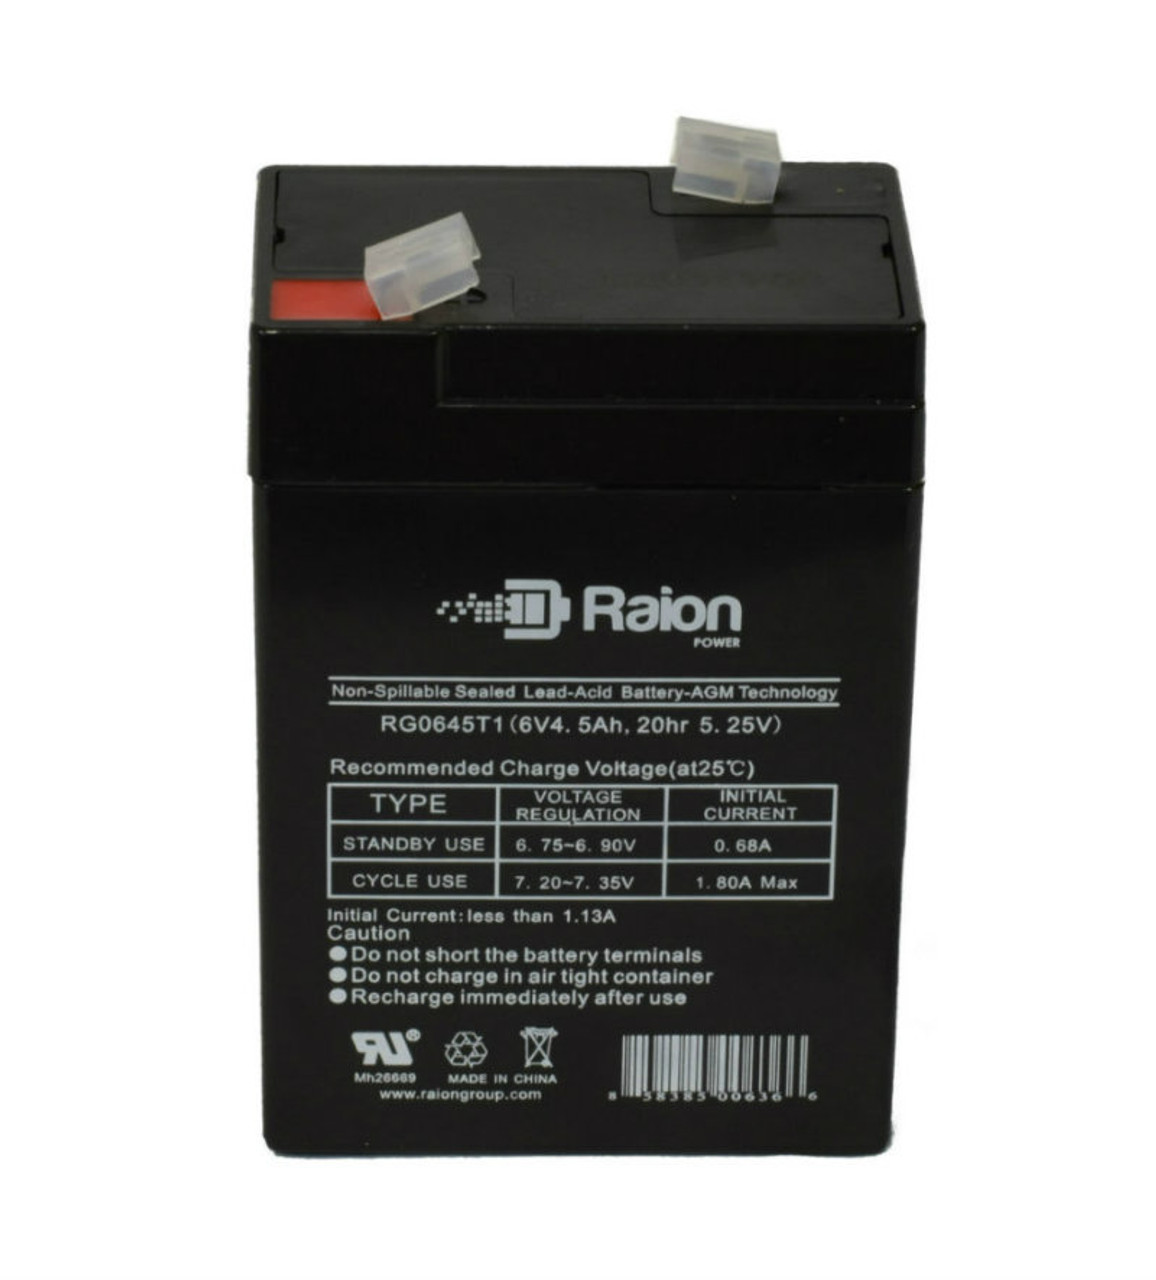 Raion Power RG0645T1 Replacement Battery Cartridge for Ohio 504Us Pulse Oximeter